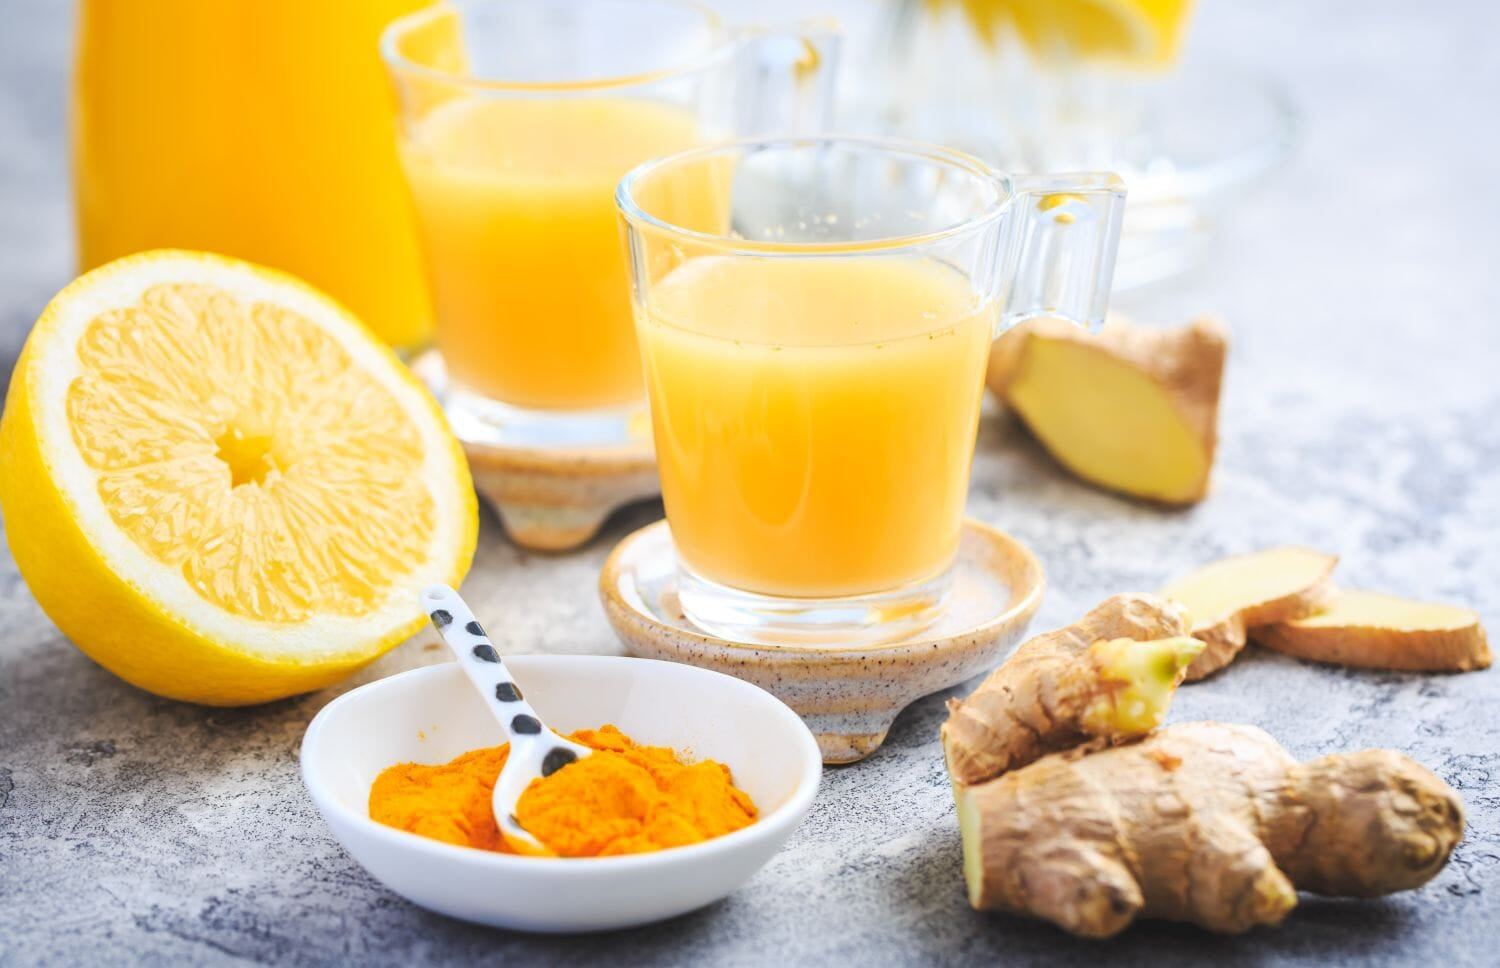 These 7 Natural Foods Make IMMU-C a Superior Immune Support Drink